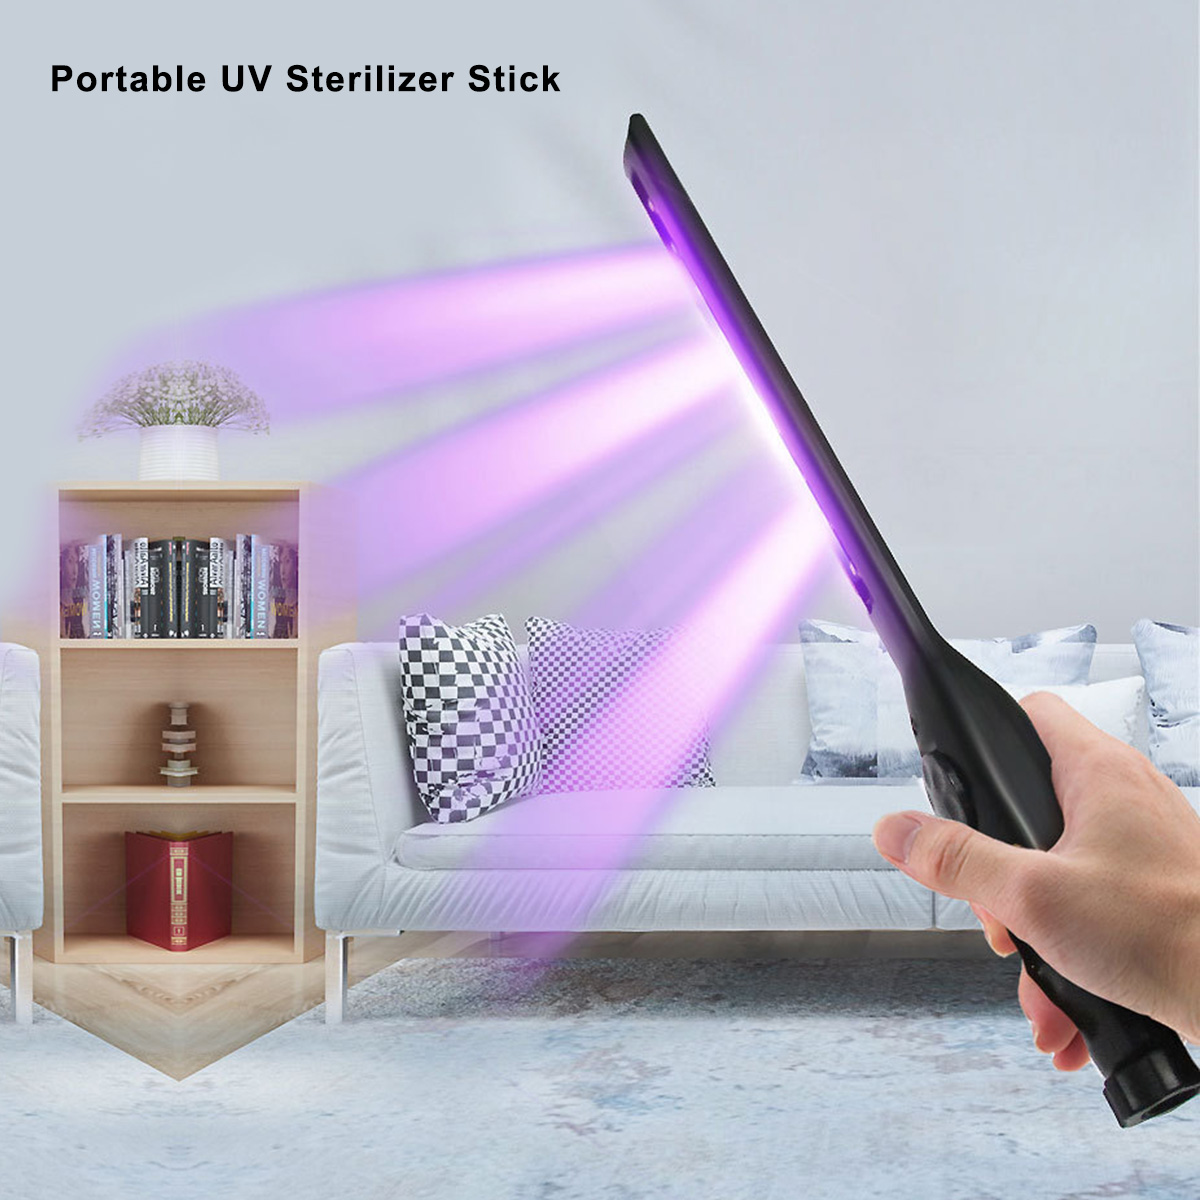 Foldable UV Disinfection Lamp Household Portable Handheld UV Disinfection Lamp for Pets Office Traveling 2W Dogs Hotel Household Wardrobe Cats Neigei Ultraviolet Light Wand Sterilizer